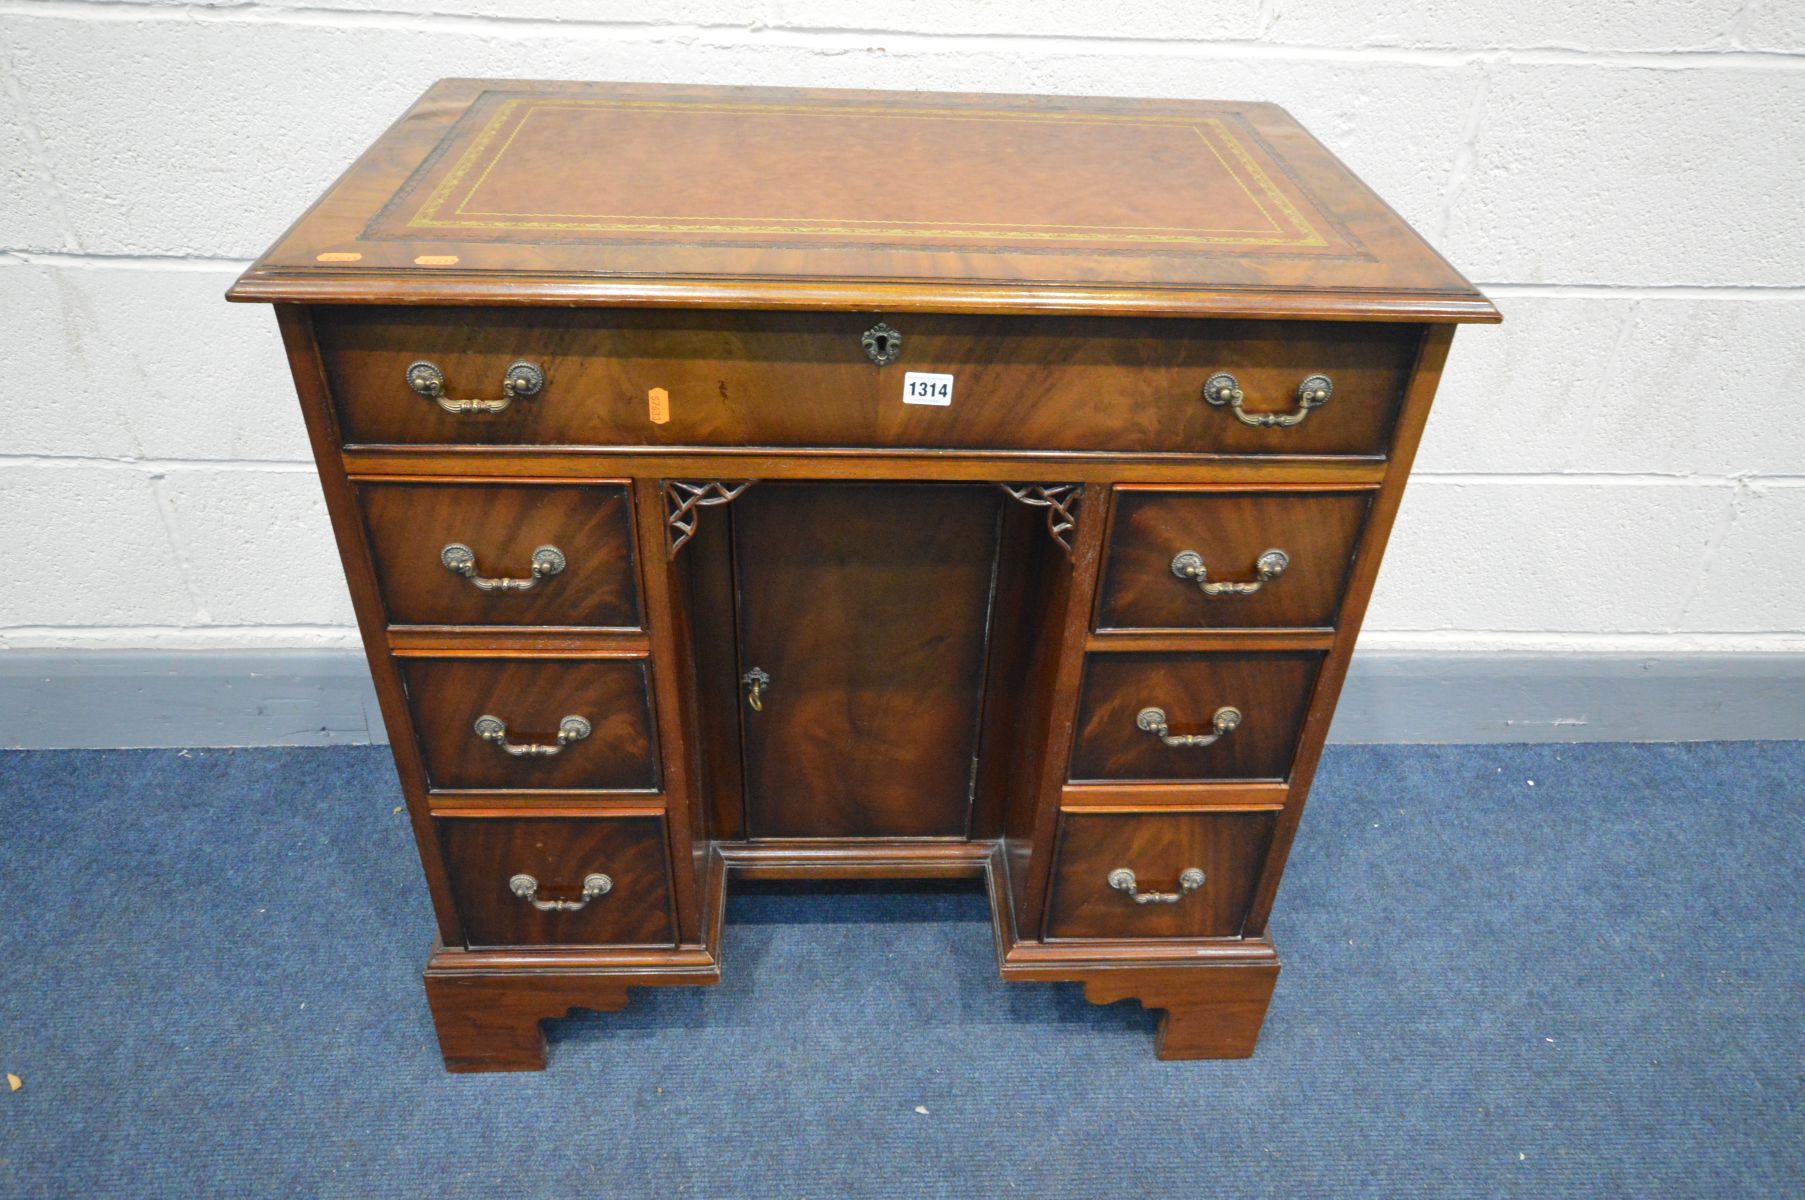 A GOOD REPRODUCTION SLIM MAHOGANY KNEE HOLE DESK, brown and gilt tooled inlay top, seven drawers and